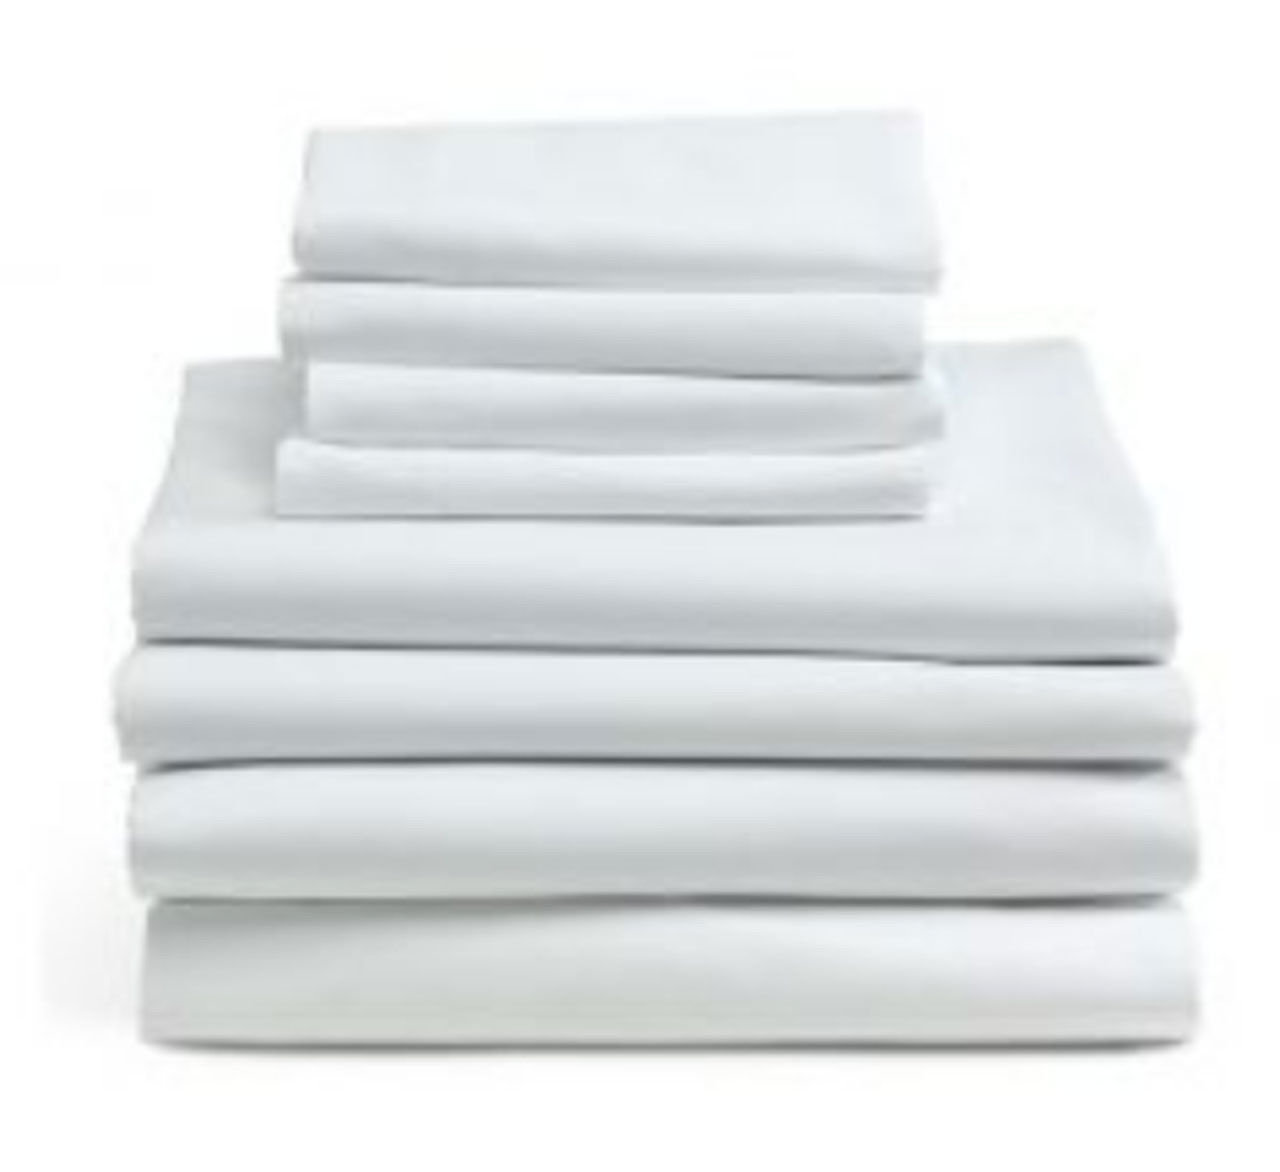 In which locations are Royal Star wholesale T-180 Hospitality Bed Sheets designed for use?